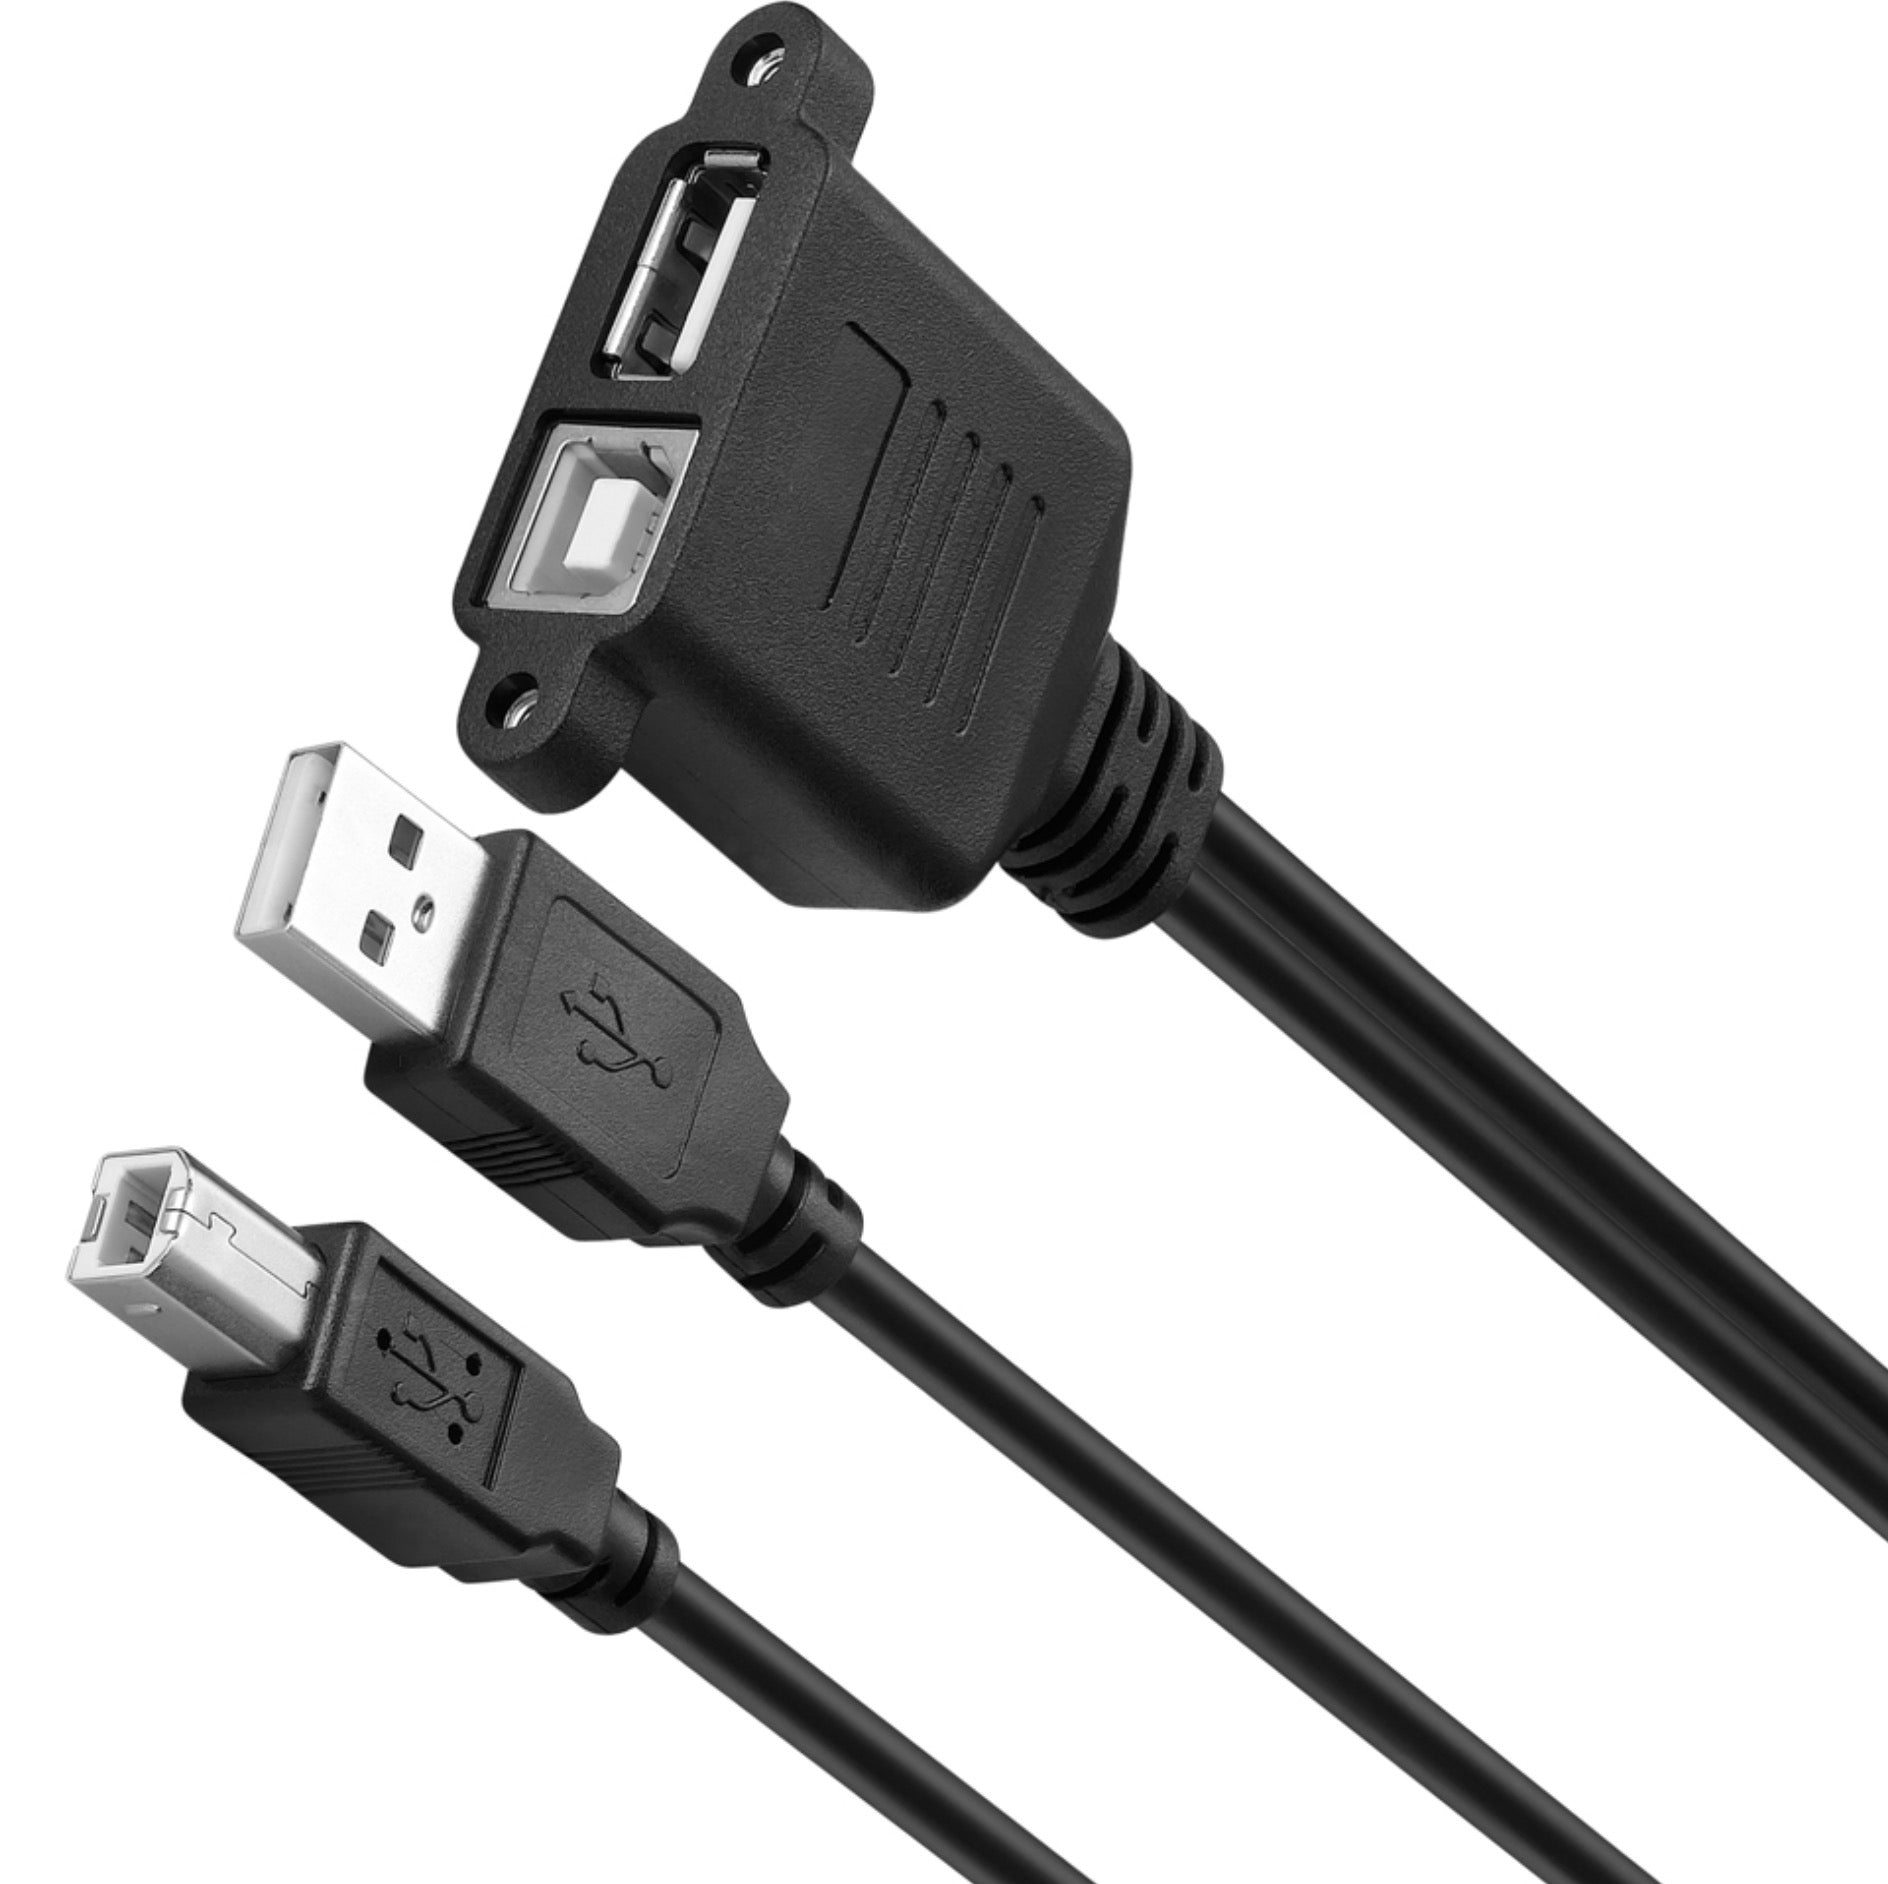 USB 2.0 A + B Male to Female Dual Panel Mount Extension Cable 1m